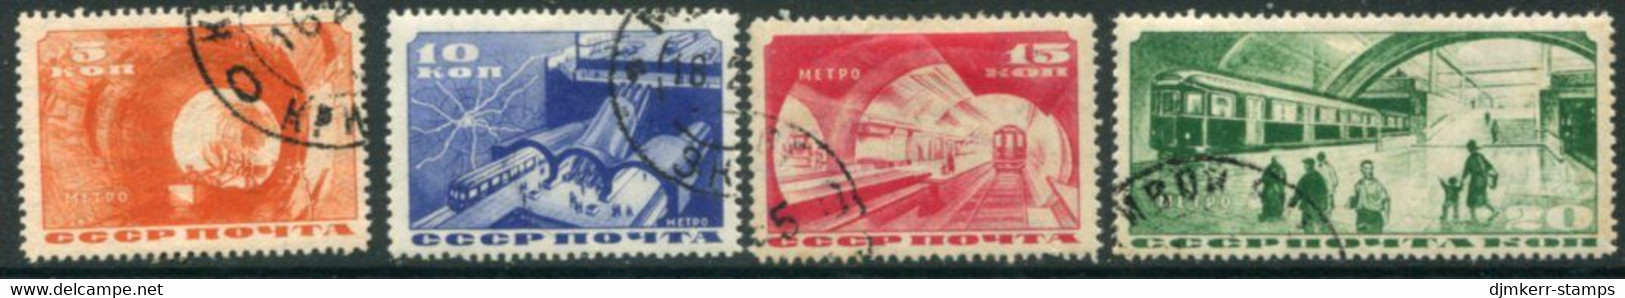 SOVIET UNION 1935 Opening Of Moscow Metro Set, Fine Used.  Michel 509-12 - Used Stamps